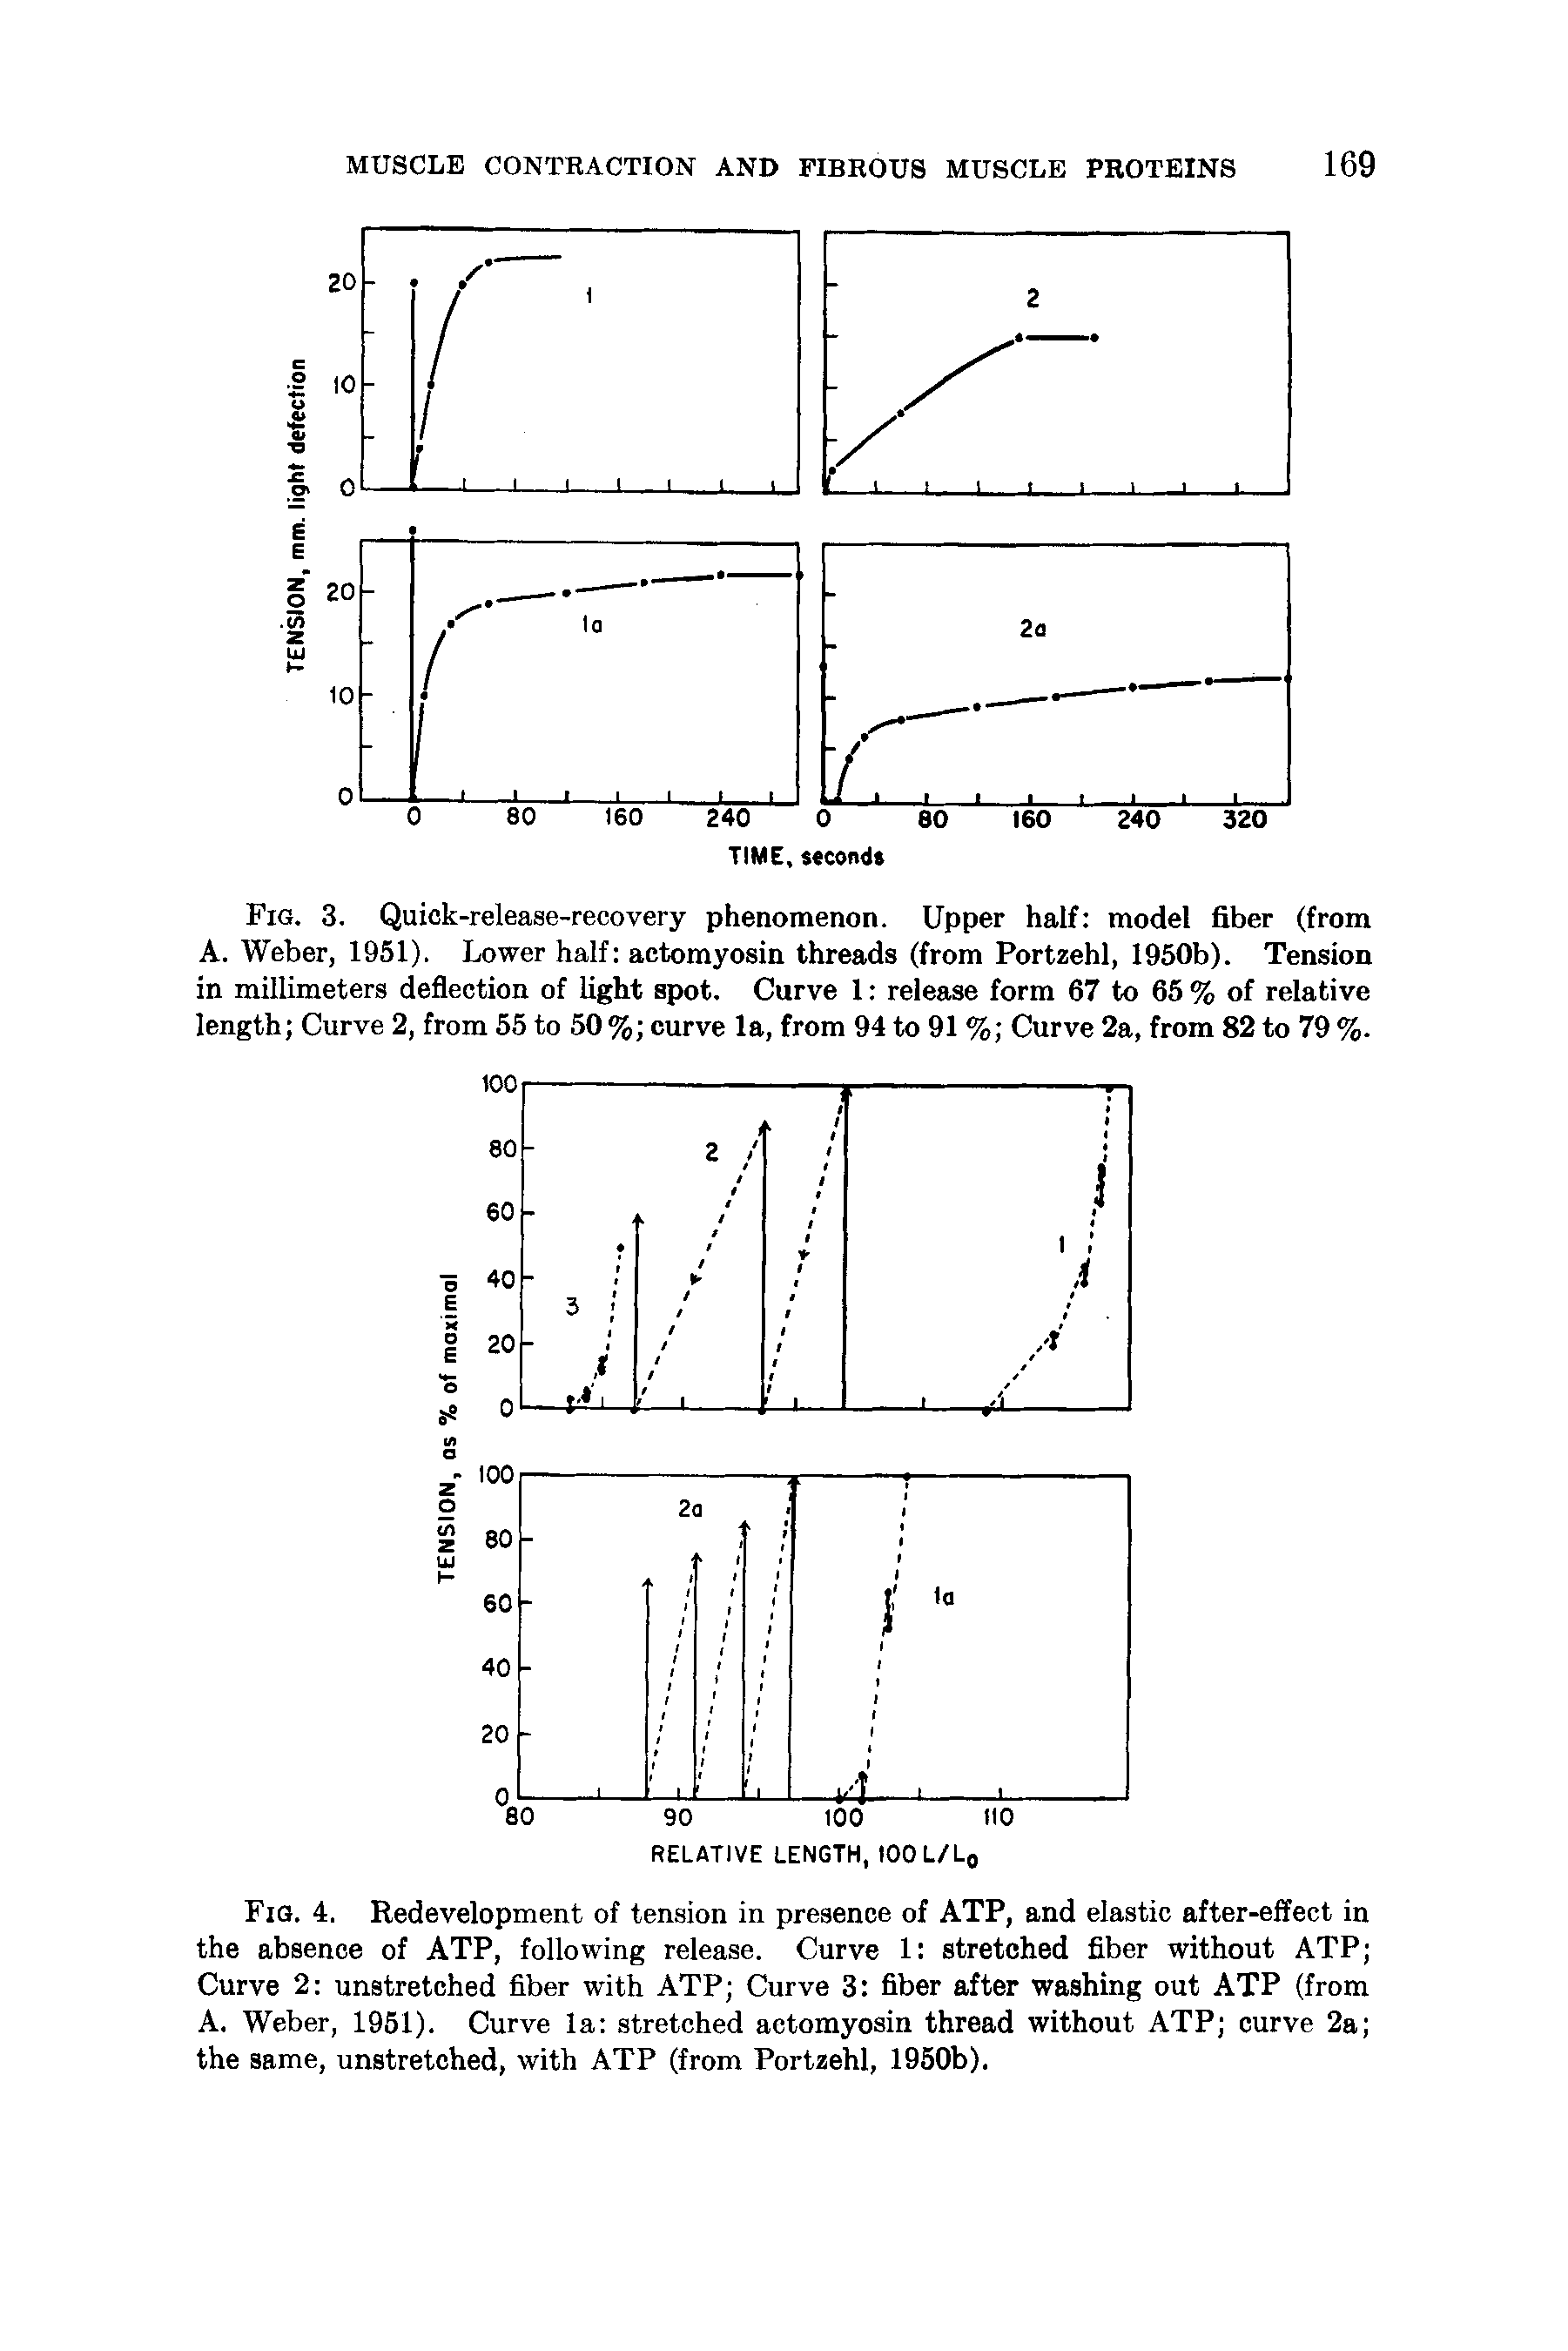 Fig. 4. Redevelopment of tension in presence of ATP, and elastic after-effect in the absence of ATP, following release. Curve 1 stretched fiber without ATP Curve 2 unstretched fiber with ATP Curve 3 fiber after washing out ATP (from A. Weber, 1951). Curve la stretched actomyosin thread without ATP curve 2a the same, unstretched, with ATP (from Portzehl, 1950b).